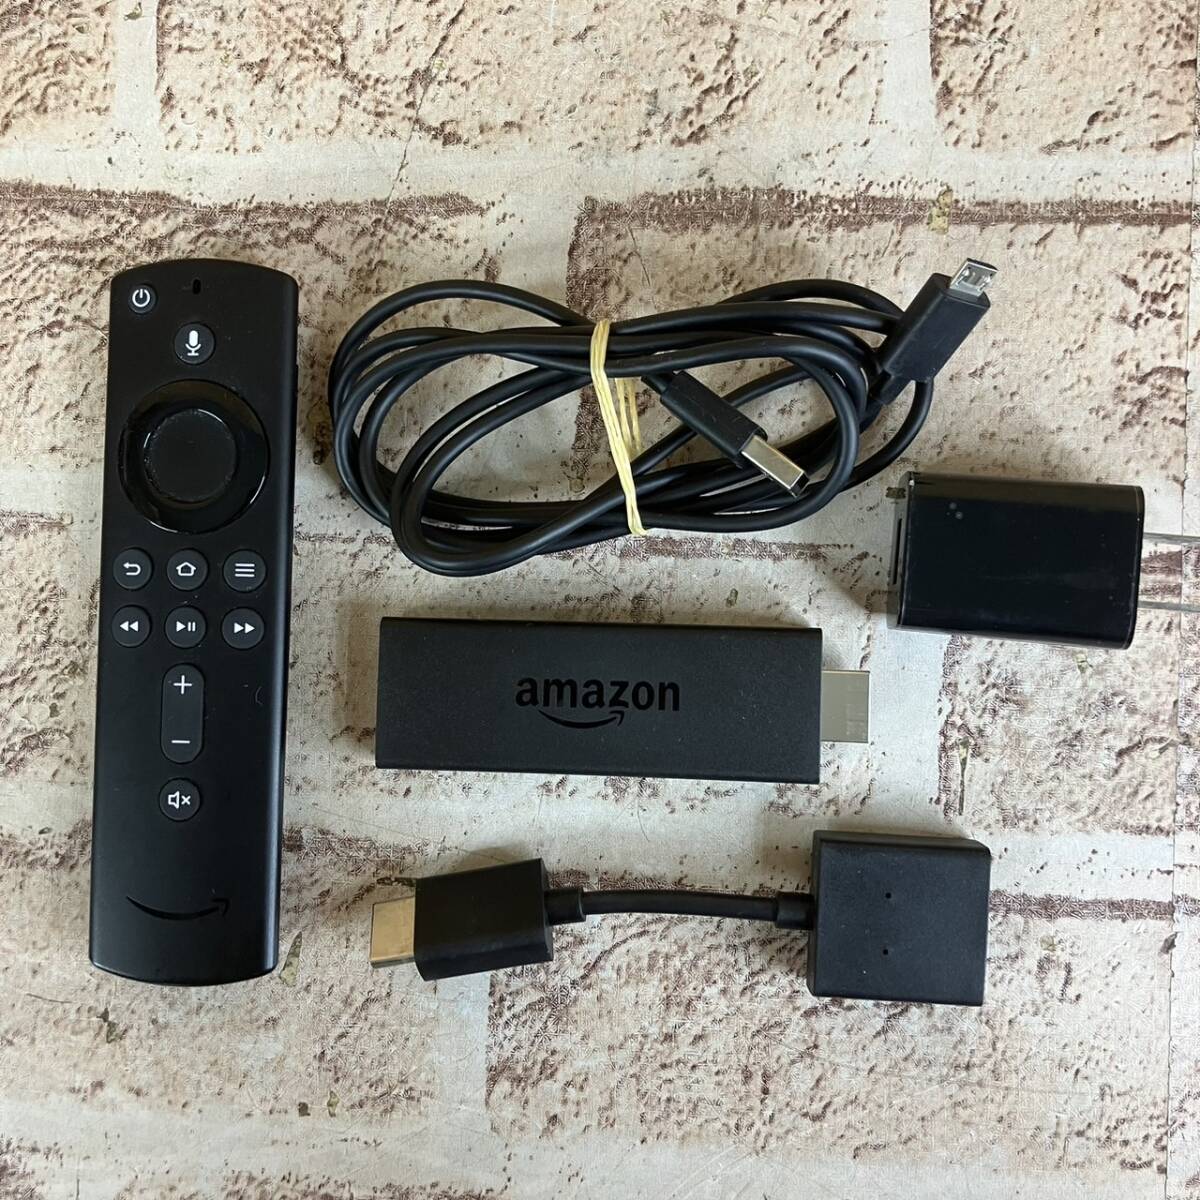 [5-212] Amazon /Amazon Fire TV Stick no. 2 generation /2017 year sale model voice recognition remote control attaching .LY73PR[ uniform carriage 297 jpy ]